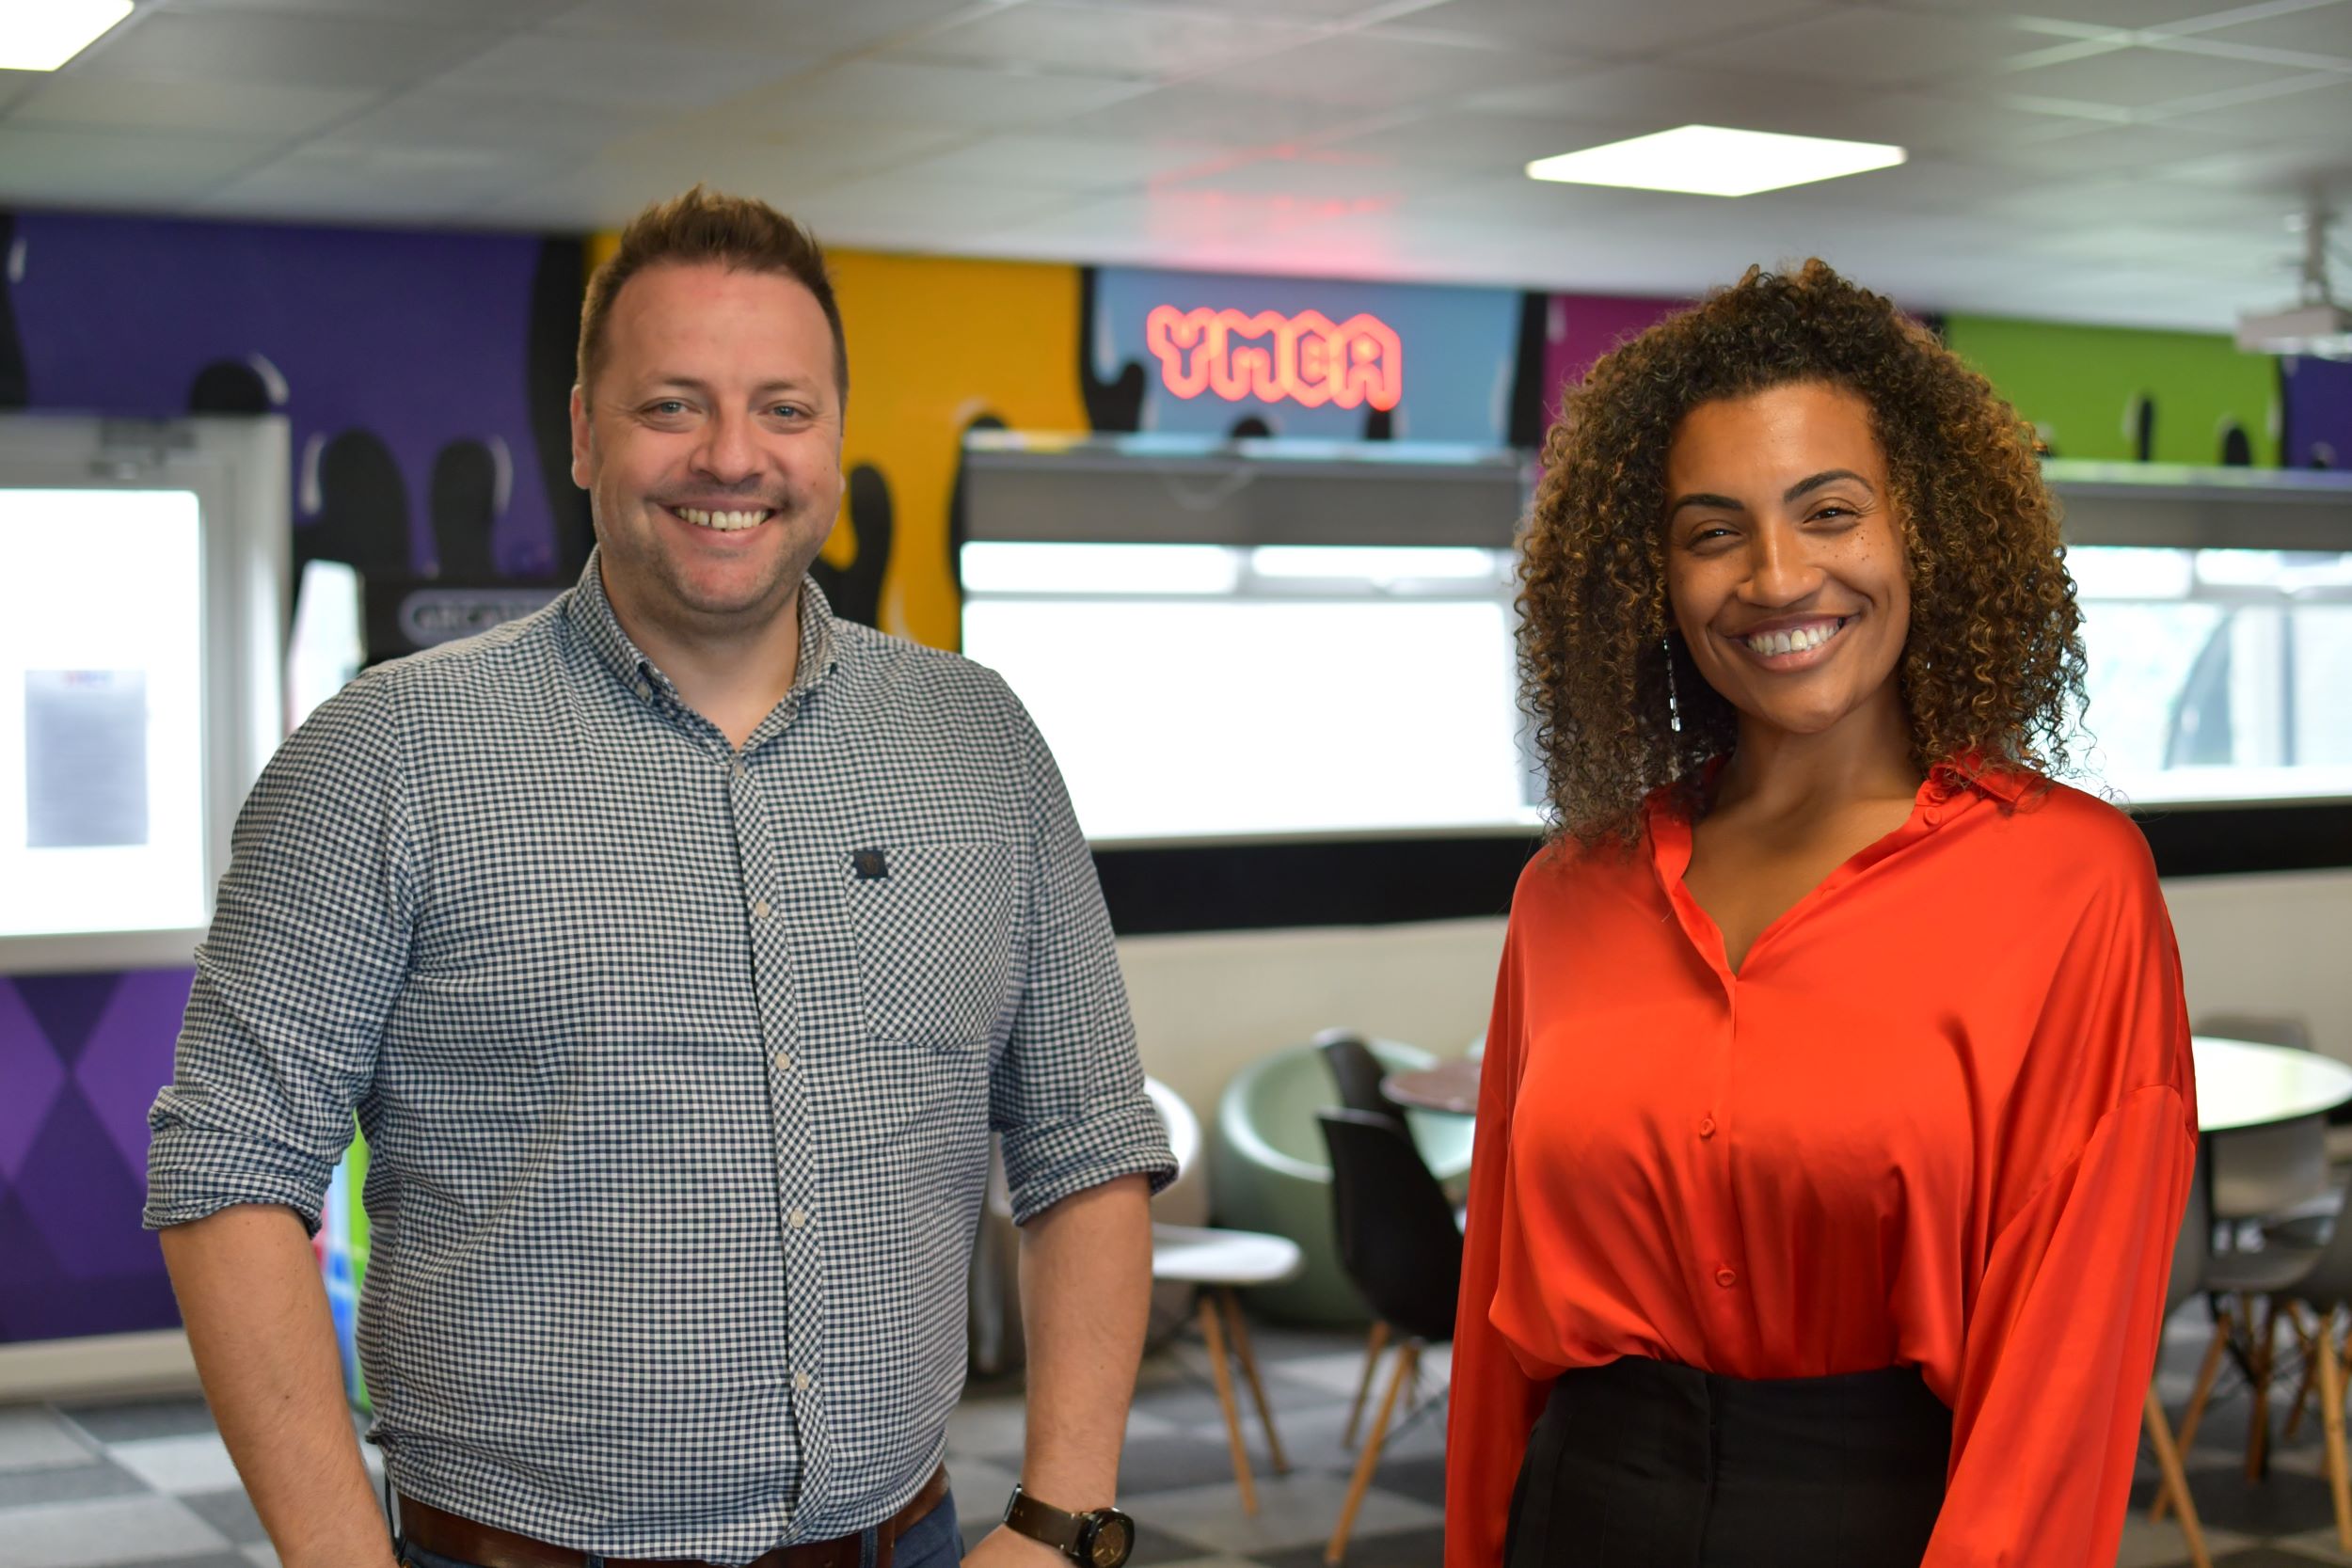 Rob Cox, CEO of YMCA Northumberland, with Jamilah Hassan, community relations manager at the Banks Group